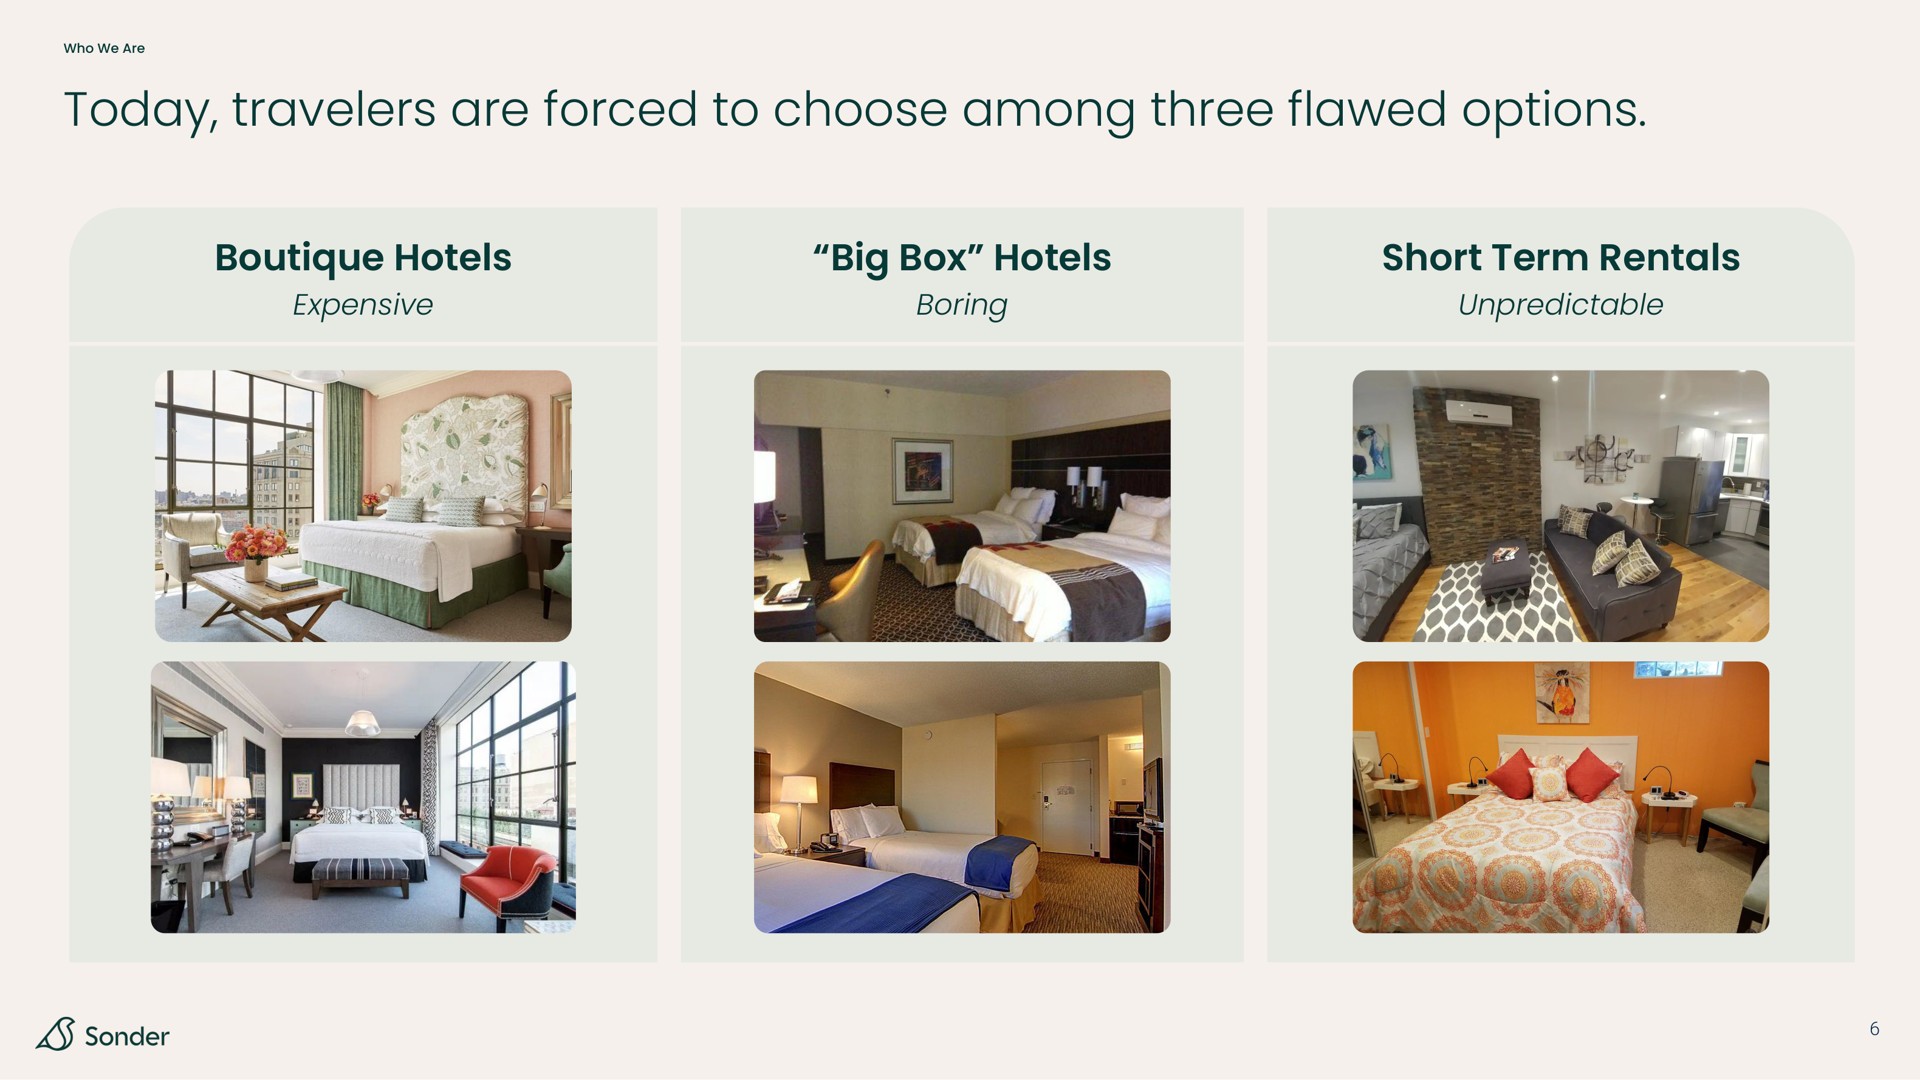 today travelers are forced to choose among three flawed options hotels big box hotels short term rentals | Sonder